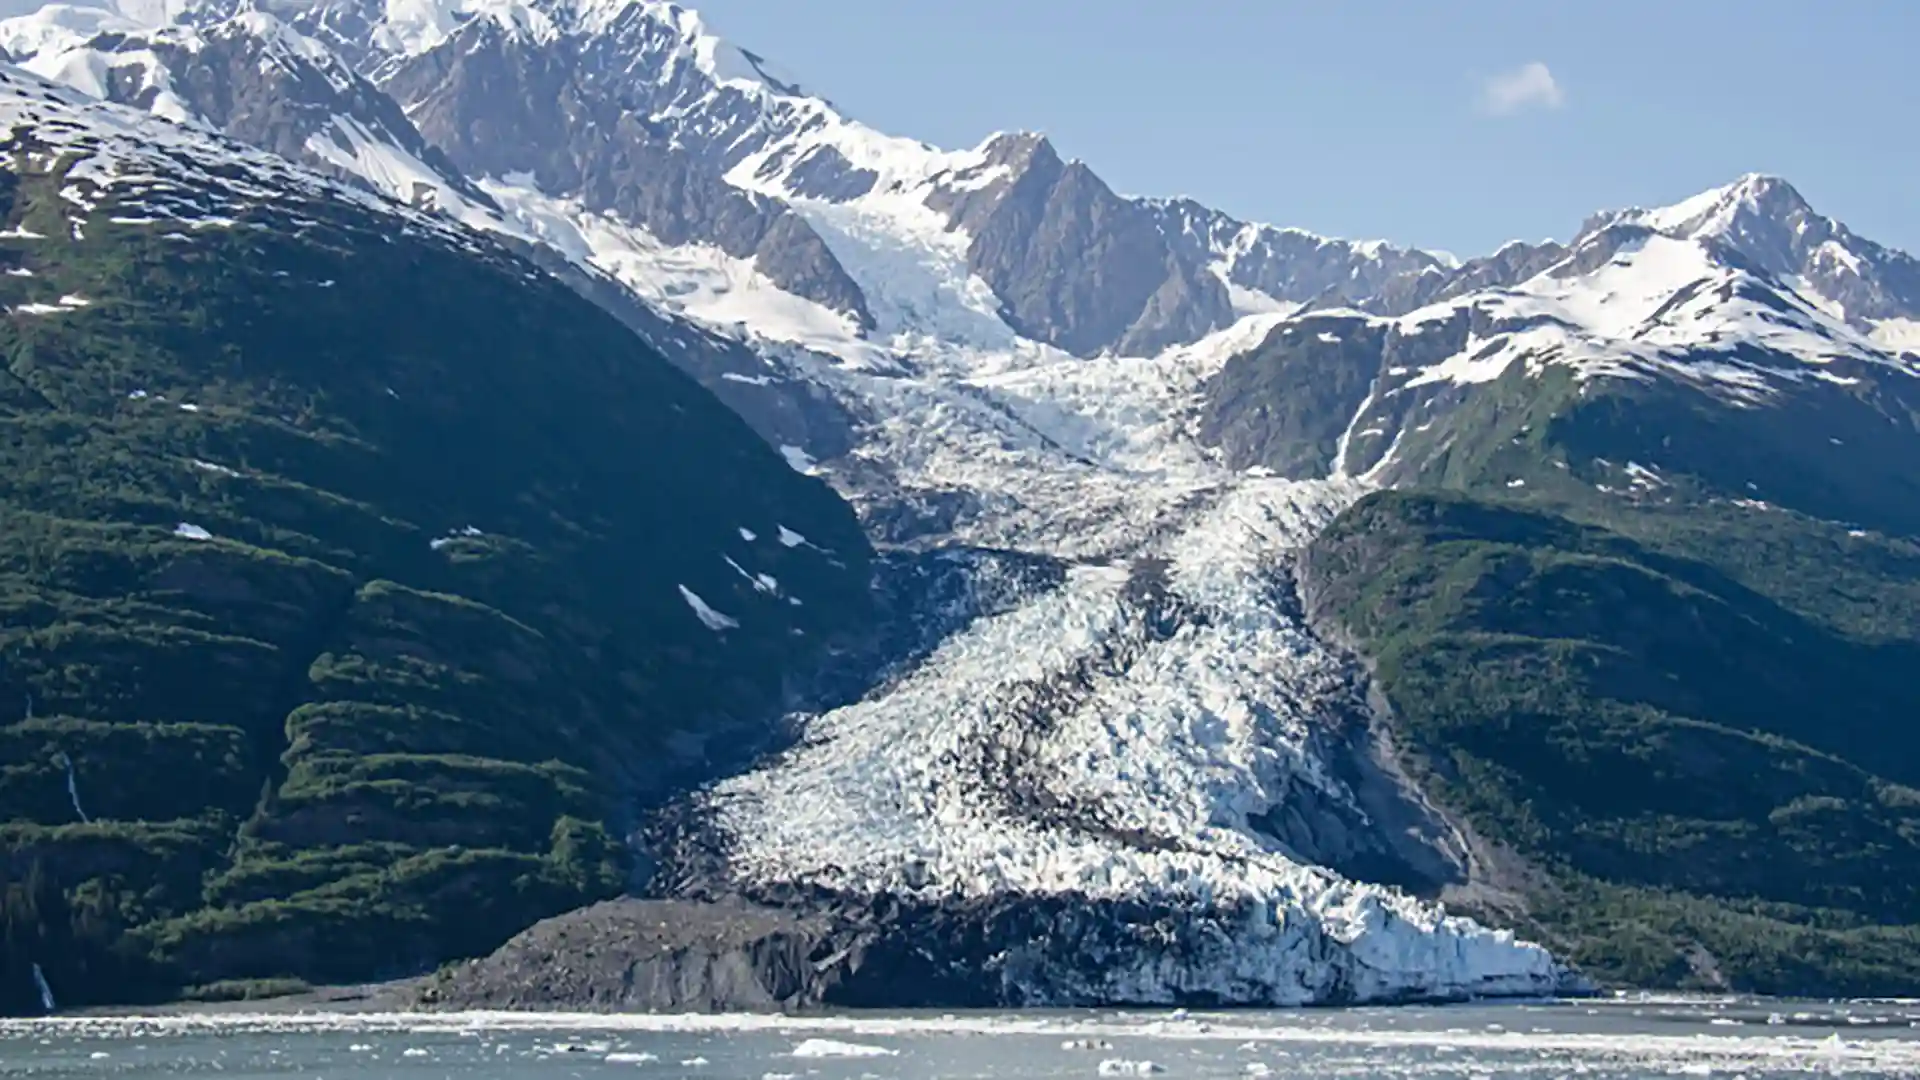 View of College Fjord in Alaska, surrounded by green forest and snowcapped mountains.